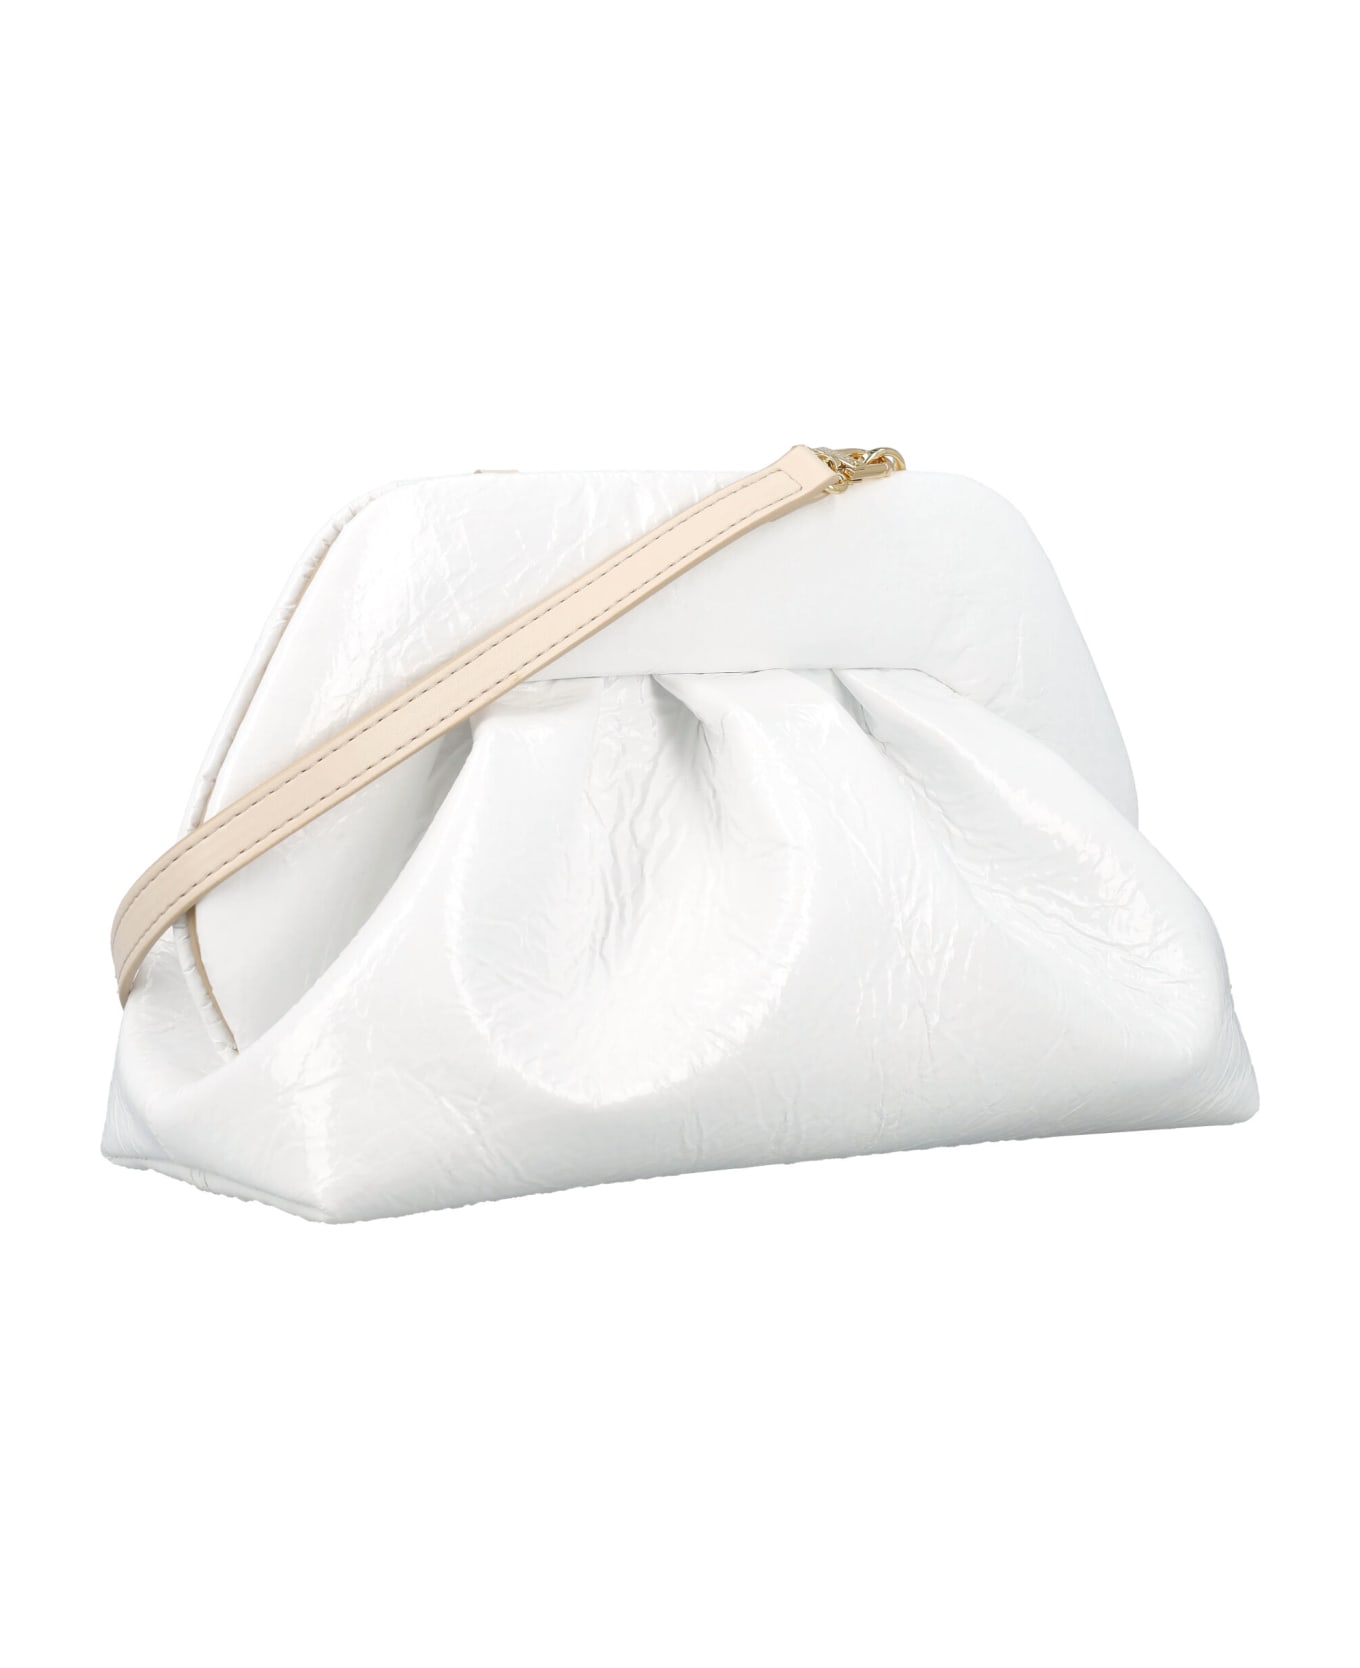 THEMOIRè Tia Clutch Pineapple Leather - SHELL IVORY クラッチバッグ